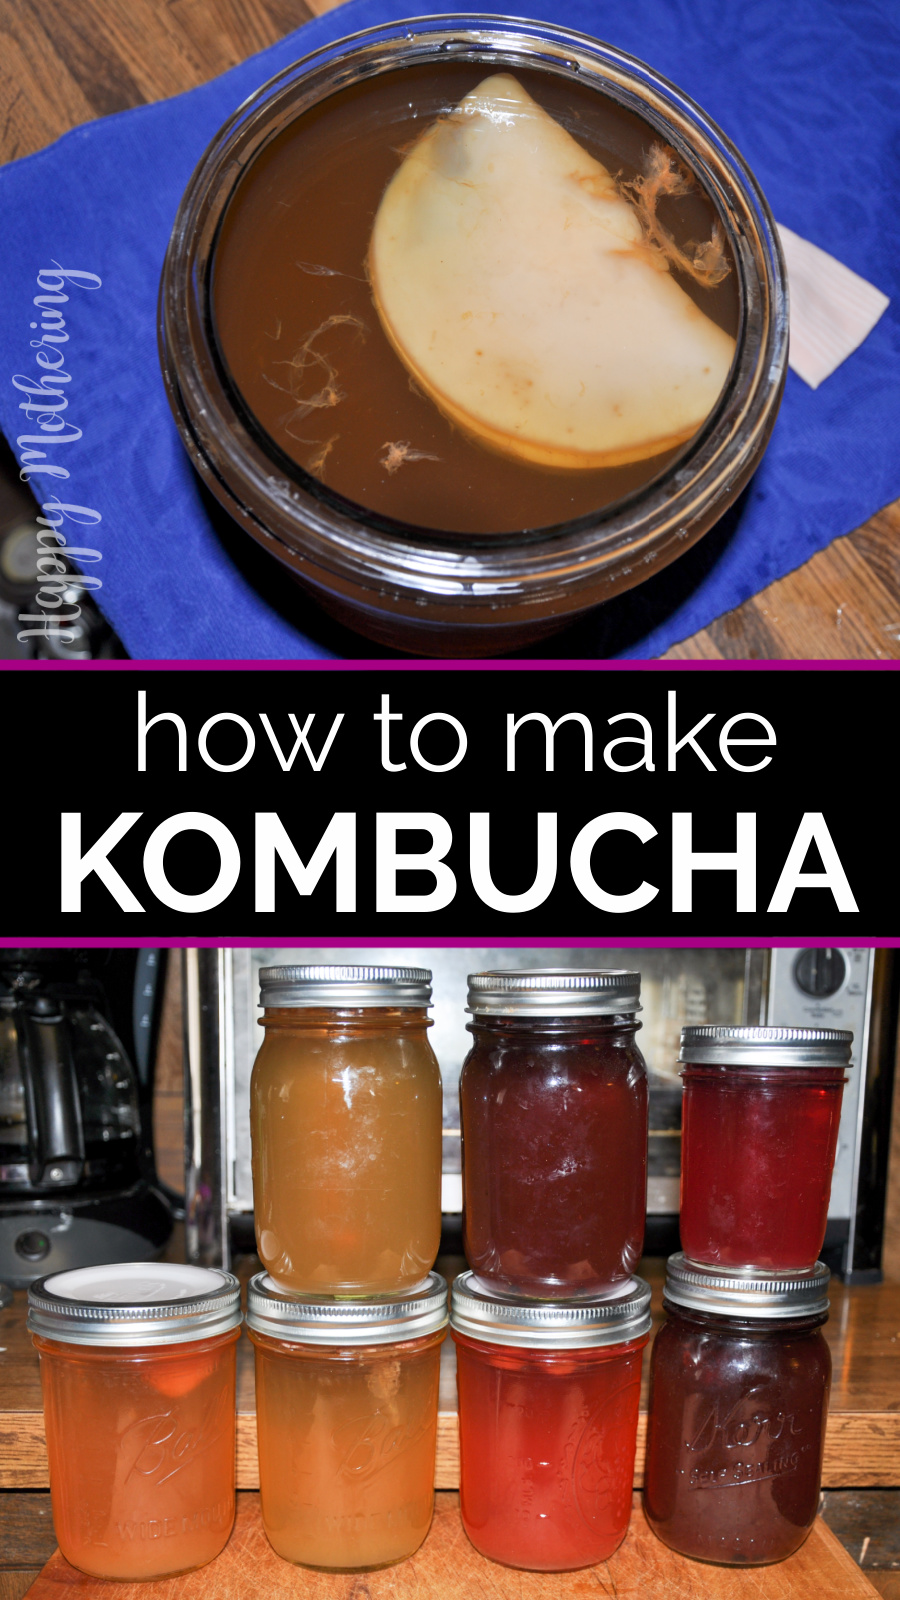 "How to Brew Kombucha" over images of glass jar of kombucha brewing above 6 jars ready to drink.